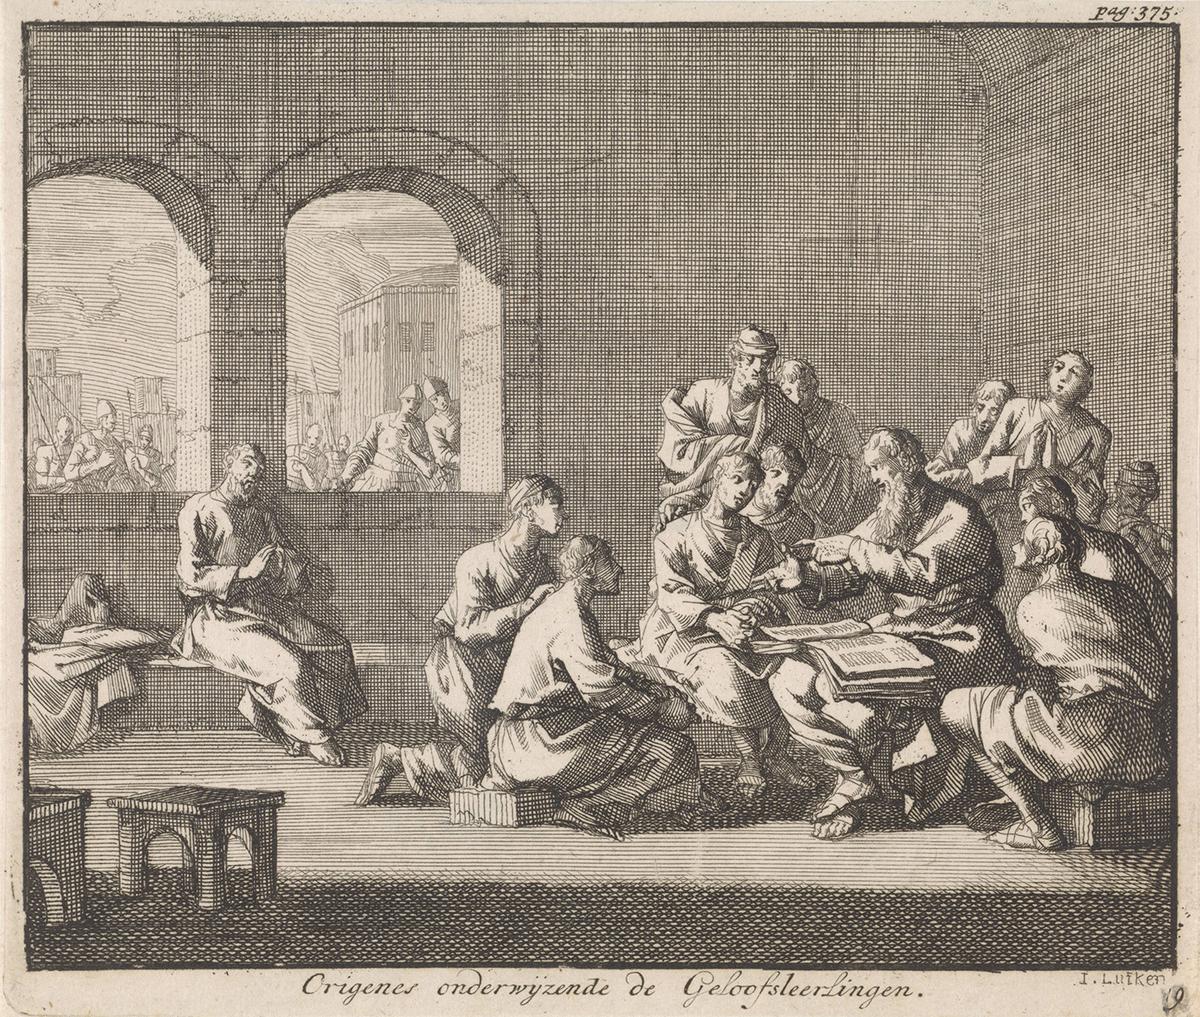 A book illustration of Origen teaching the catechism to a group of students, 1700, by Jan Luyken. Rijksmuseum, Amsterdam. (Public Domain)